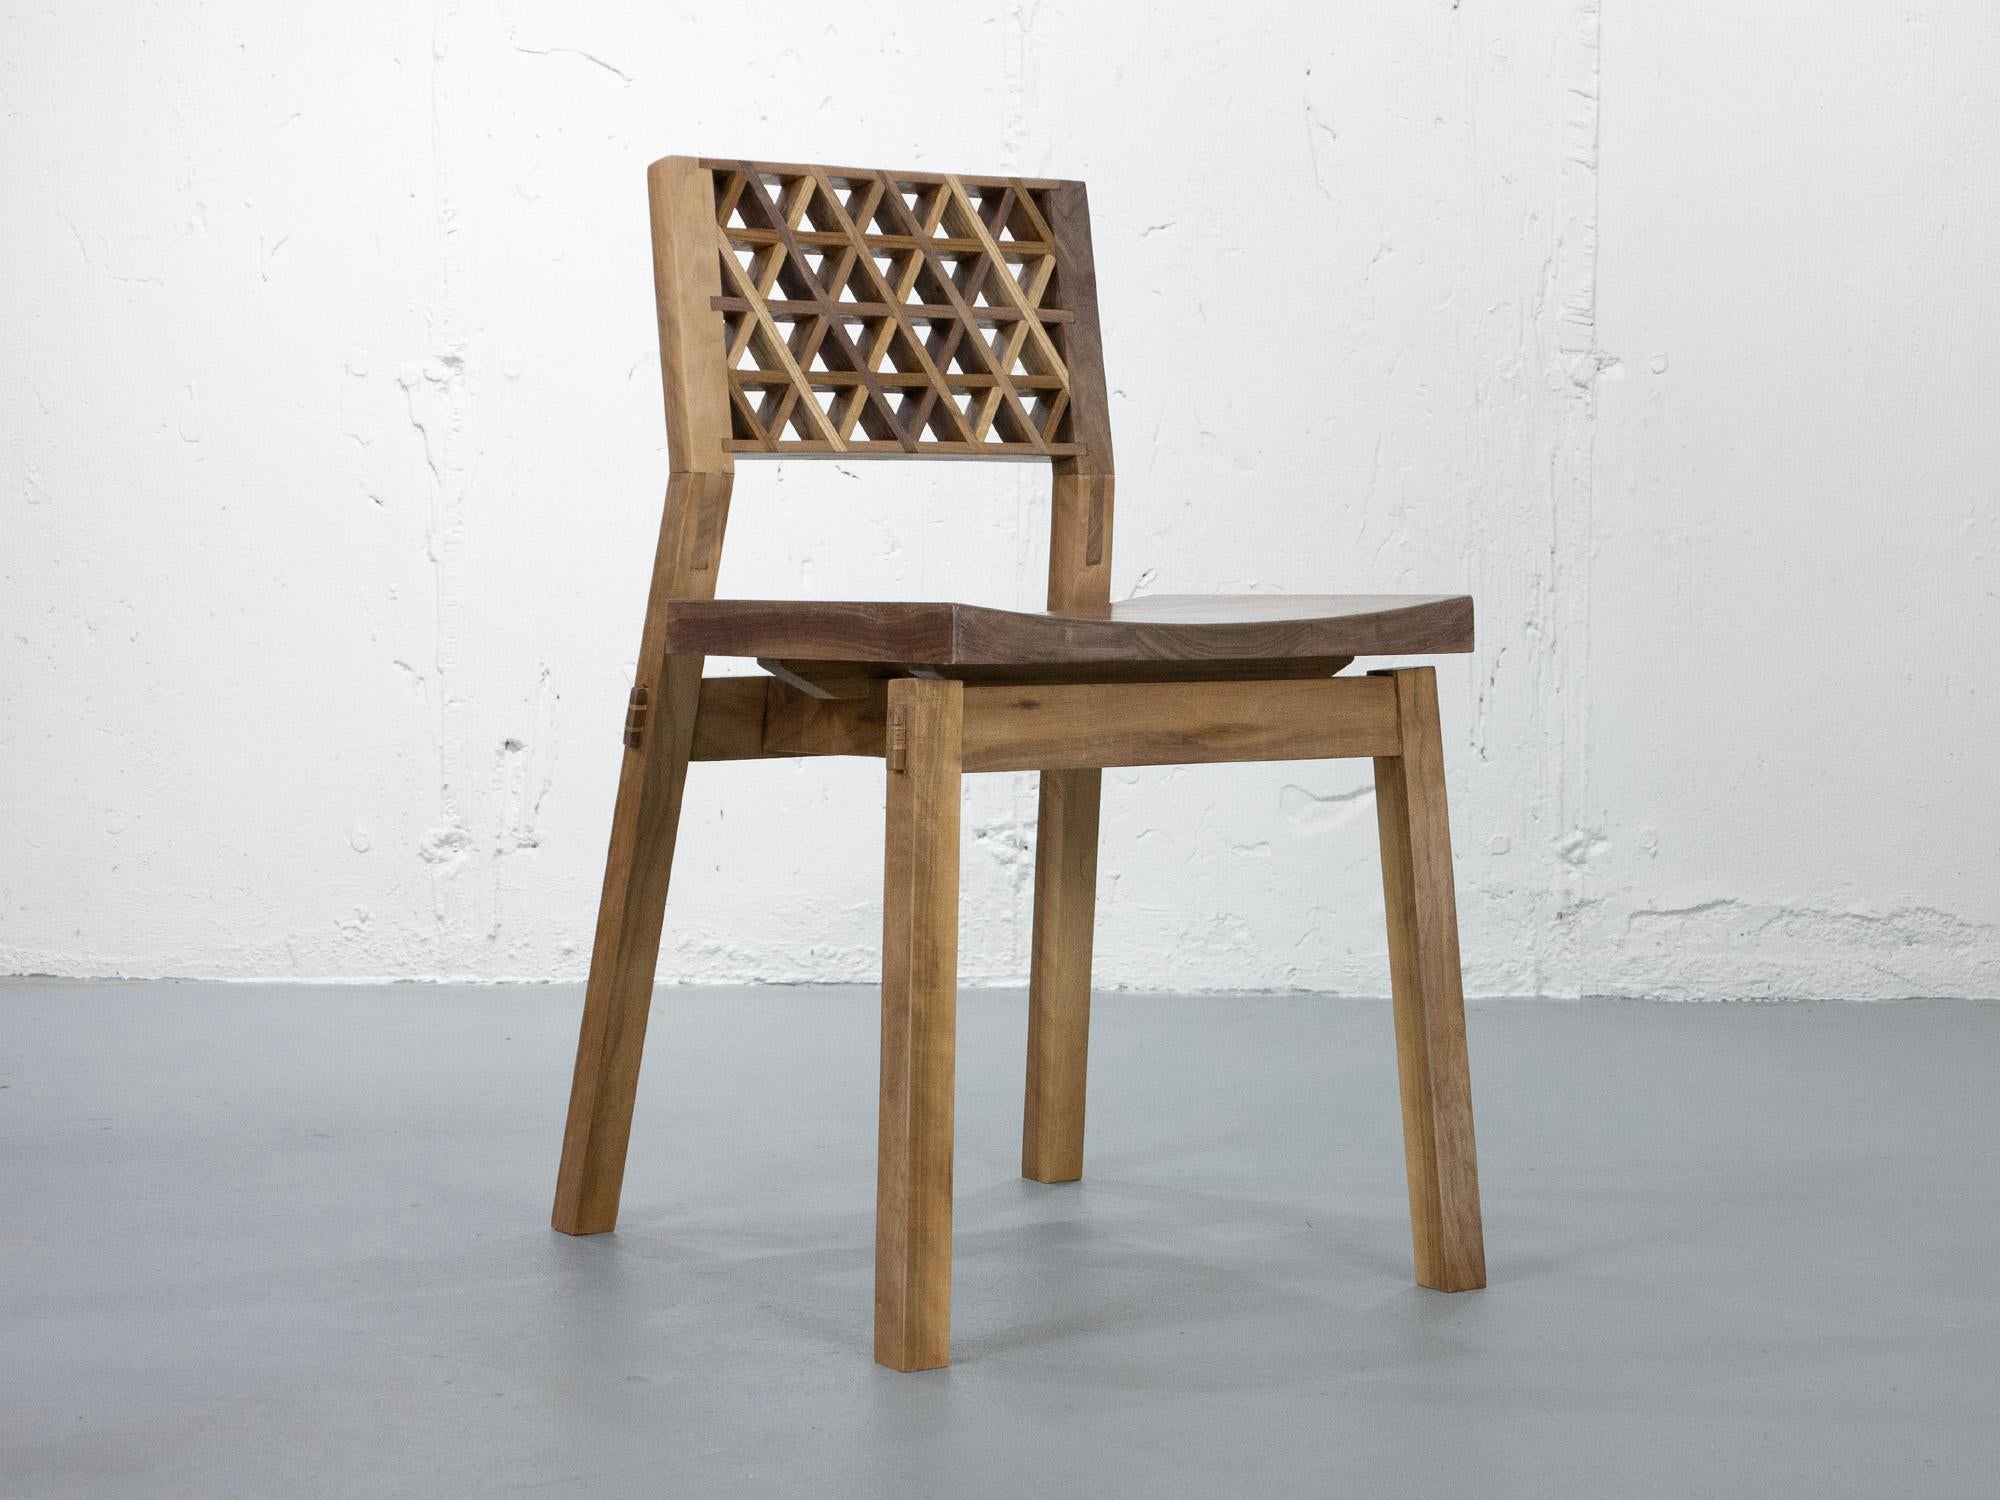 Hand-Crafted SIDE CHAIR in solid black walnut with Japanese Kumiko patterned backrest For Sale